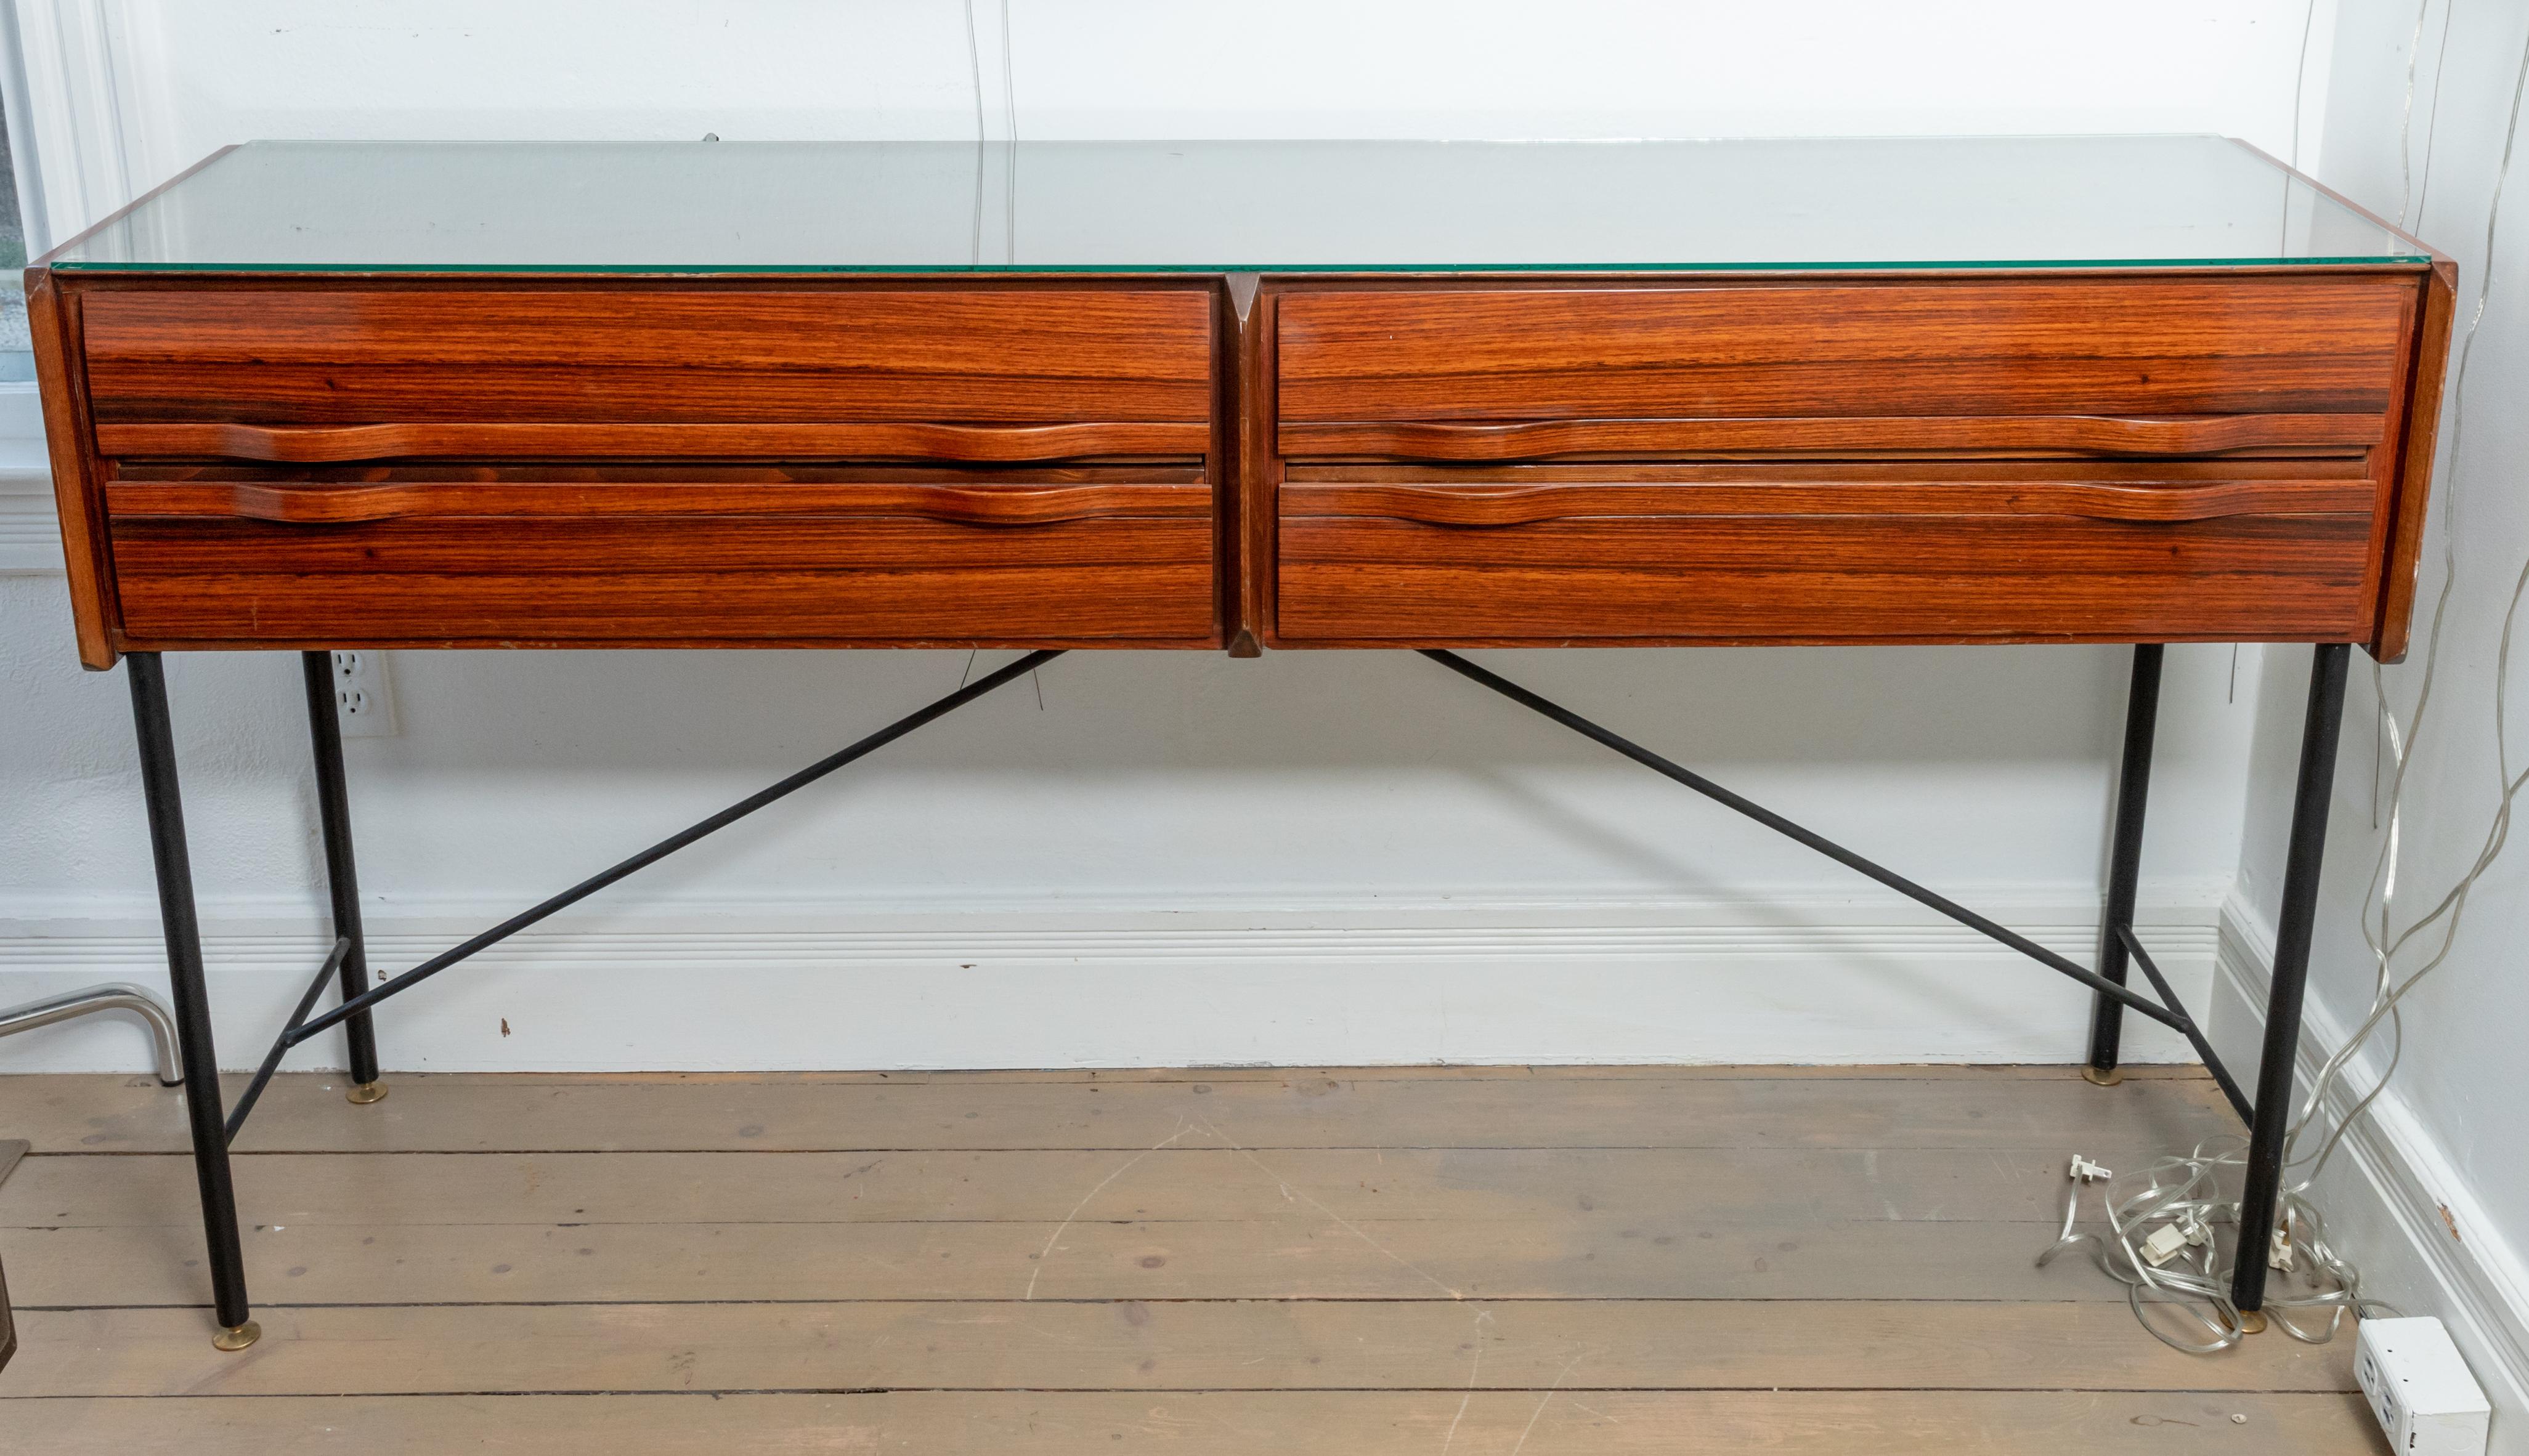 Rectangular rosewood four drawer sideboard/console with blackened iron supports, brass detail and glass top.